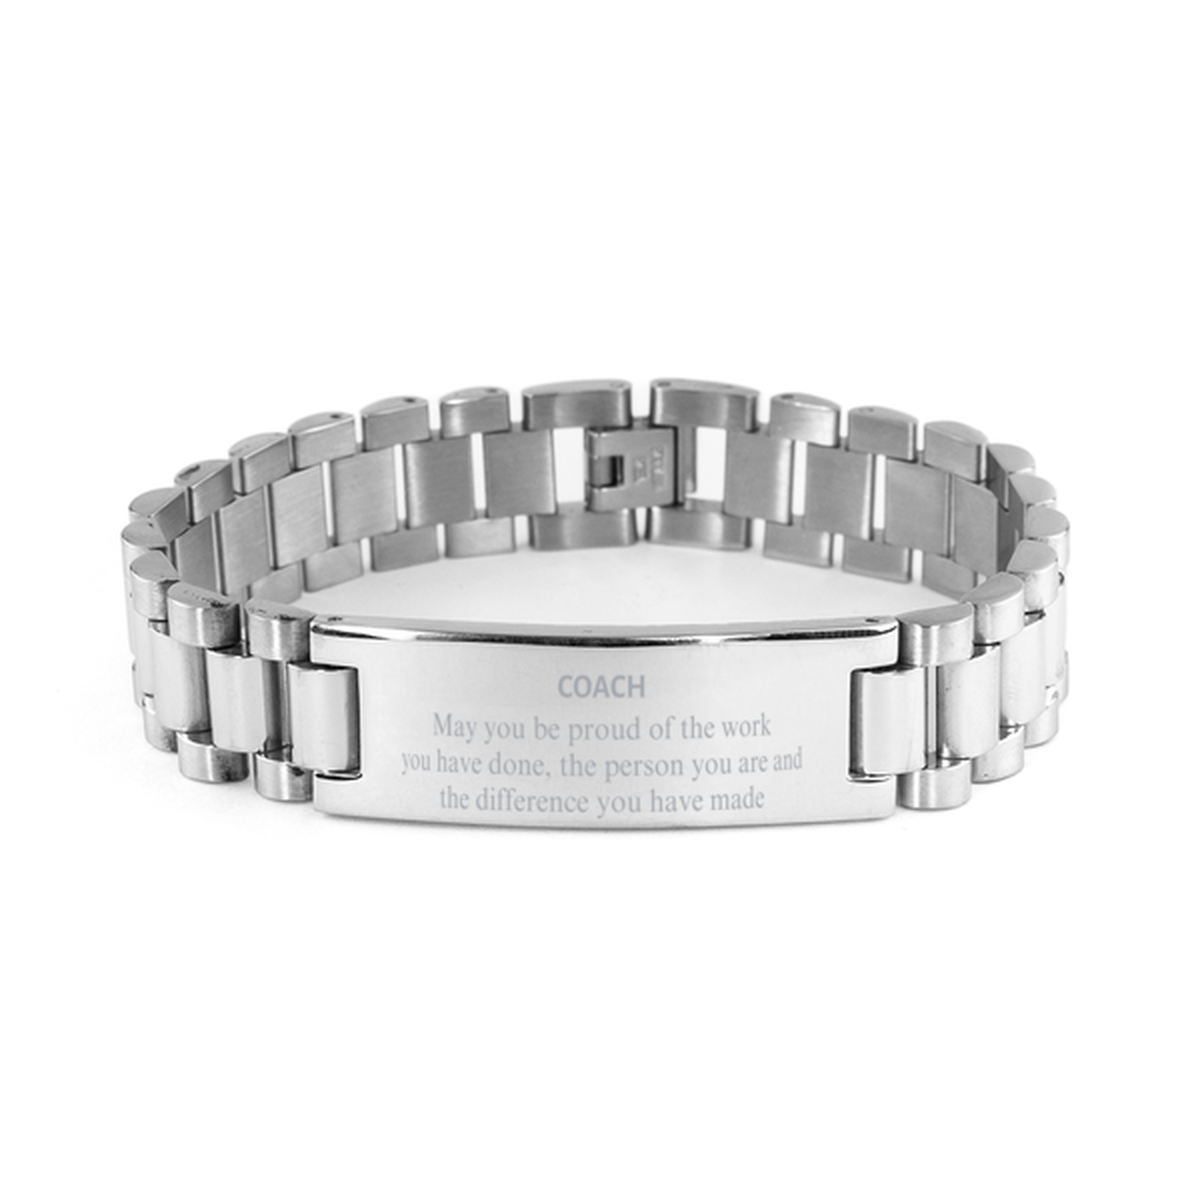 Coach May you be proud of the work you have done, Retirement Coach Ladder Stainless Steel Bracelet for Colleague Appreciation Gifts Amazing for Coach